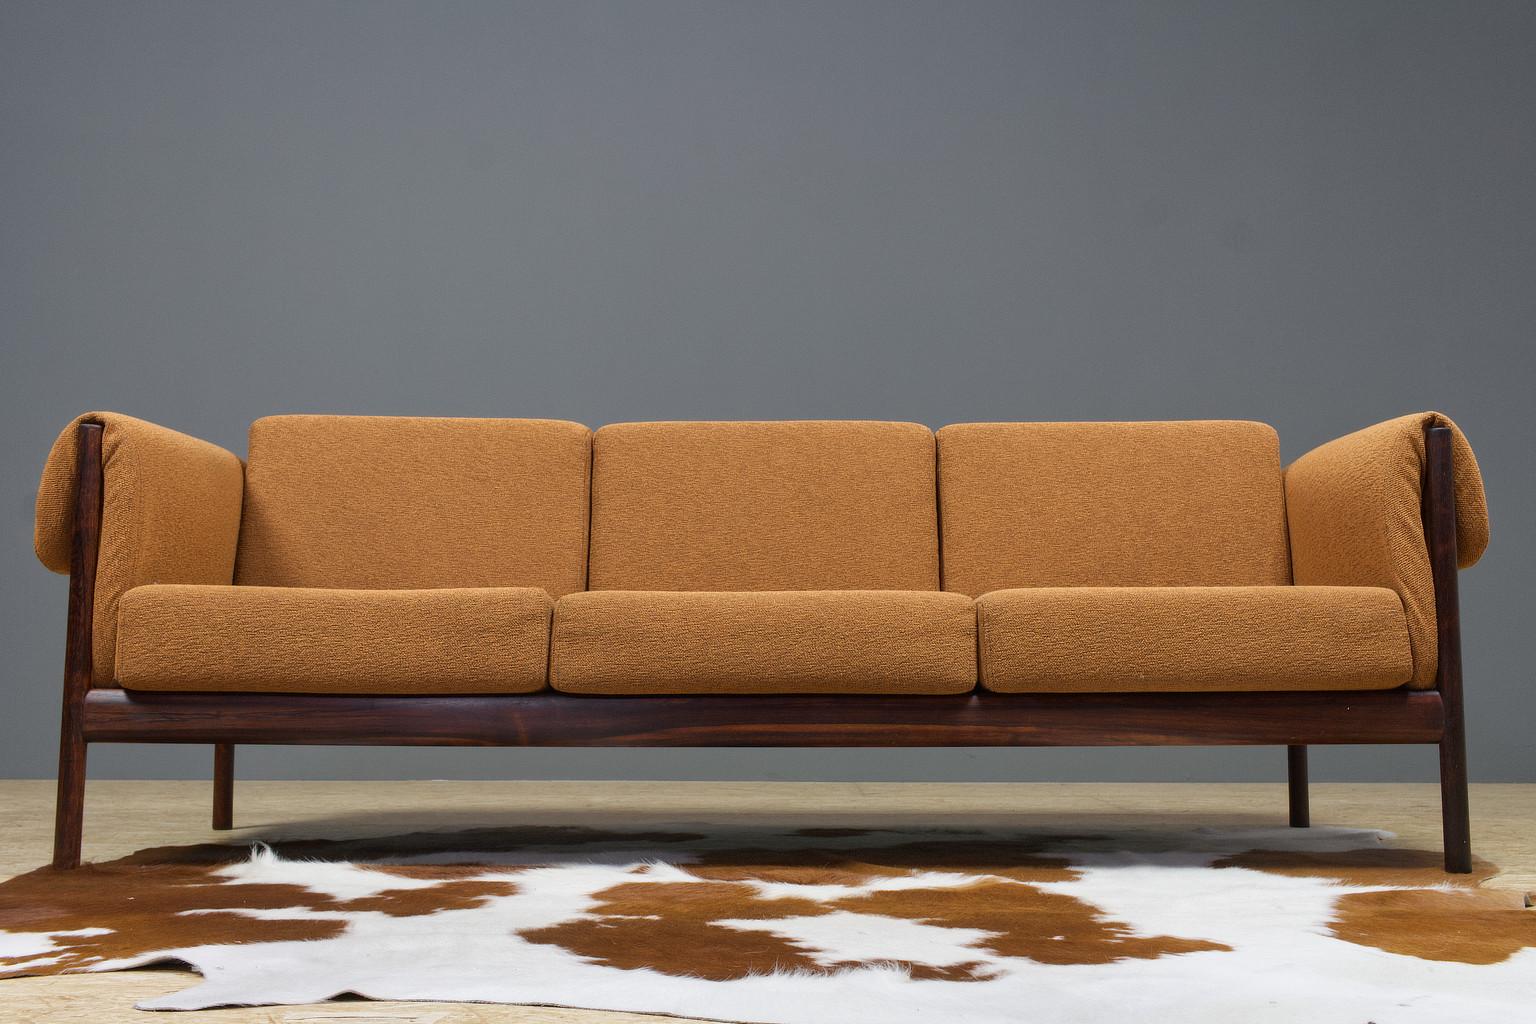 An elegant and refined piece of Scandinavian Modern design, robust yet elegant, a rectangular sofa with an eye catching slat back and a great quality brown furniture fabric (Korinthe by De Ploeg). The fabric is intact, and cleaned and the comfort is